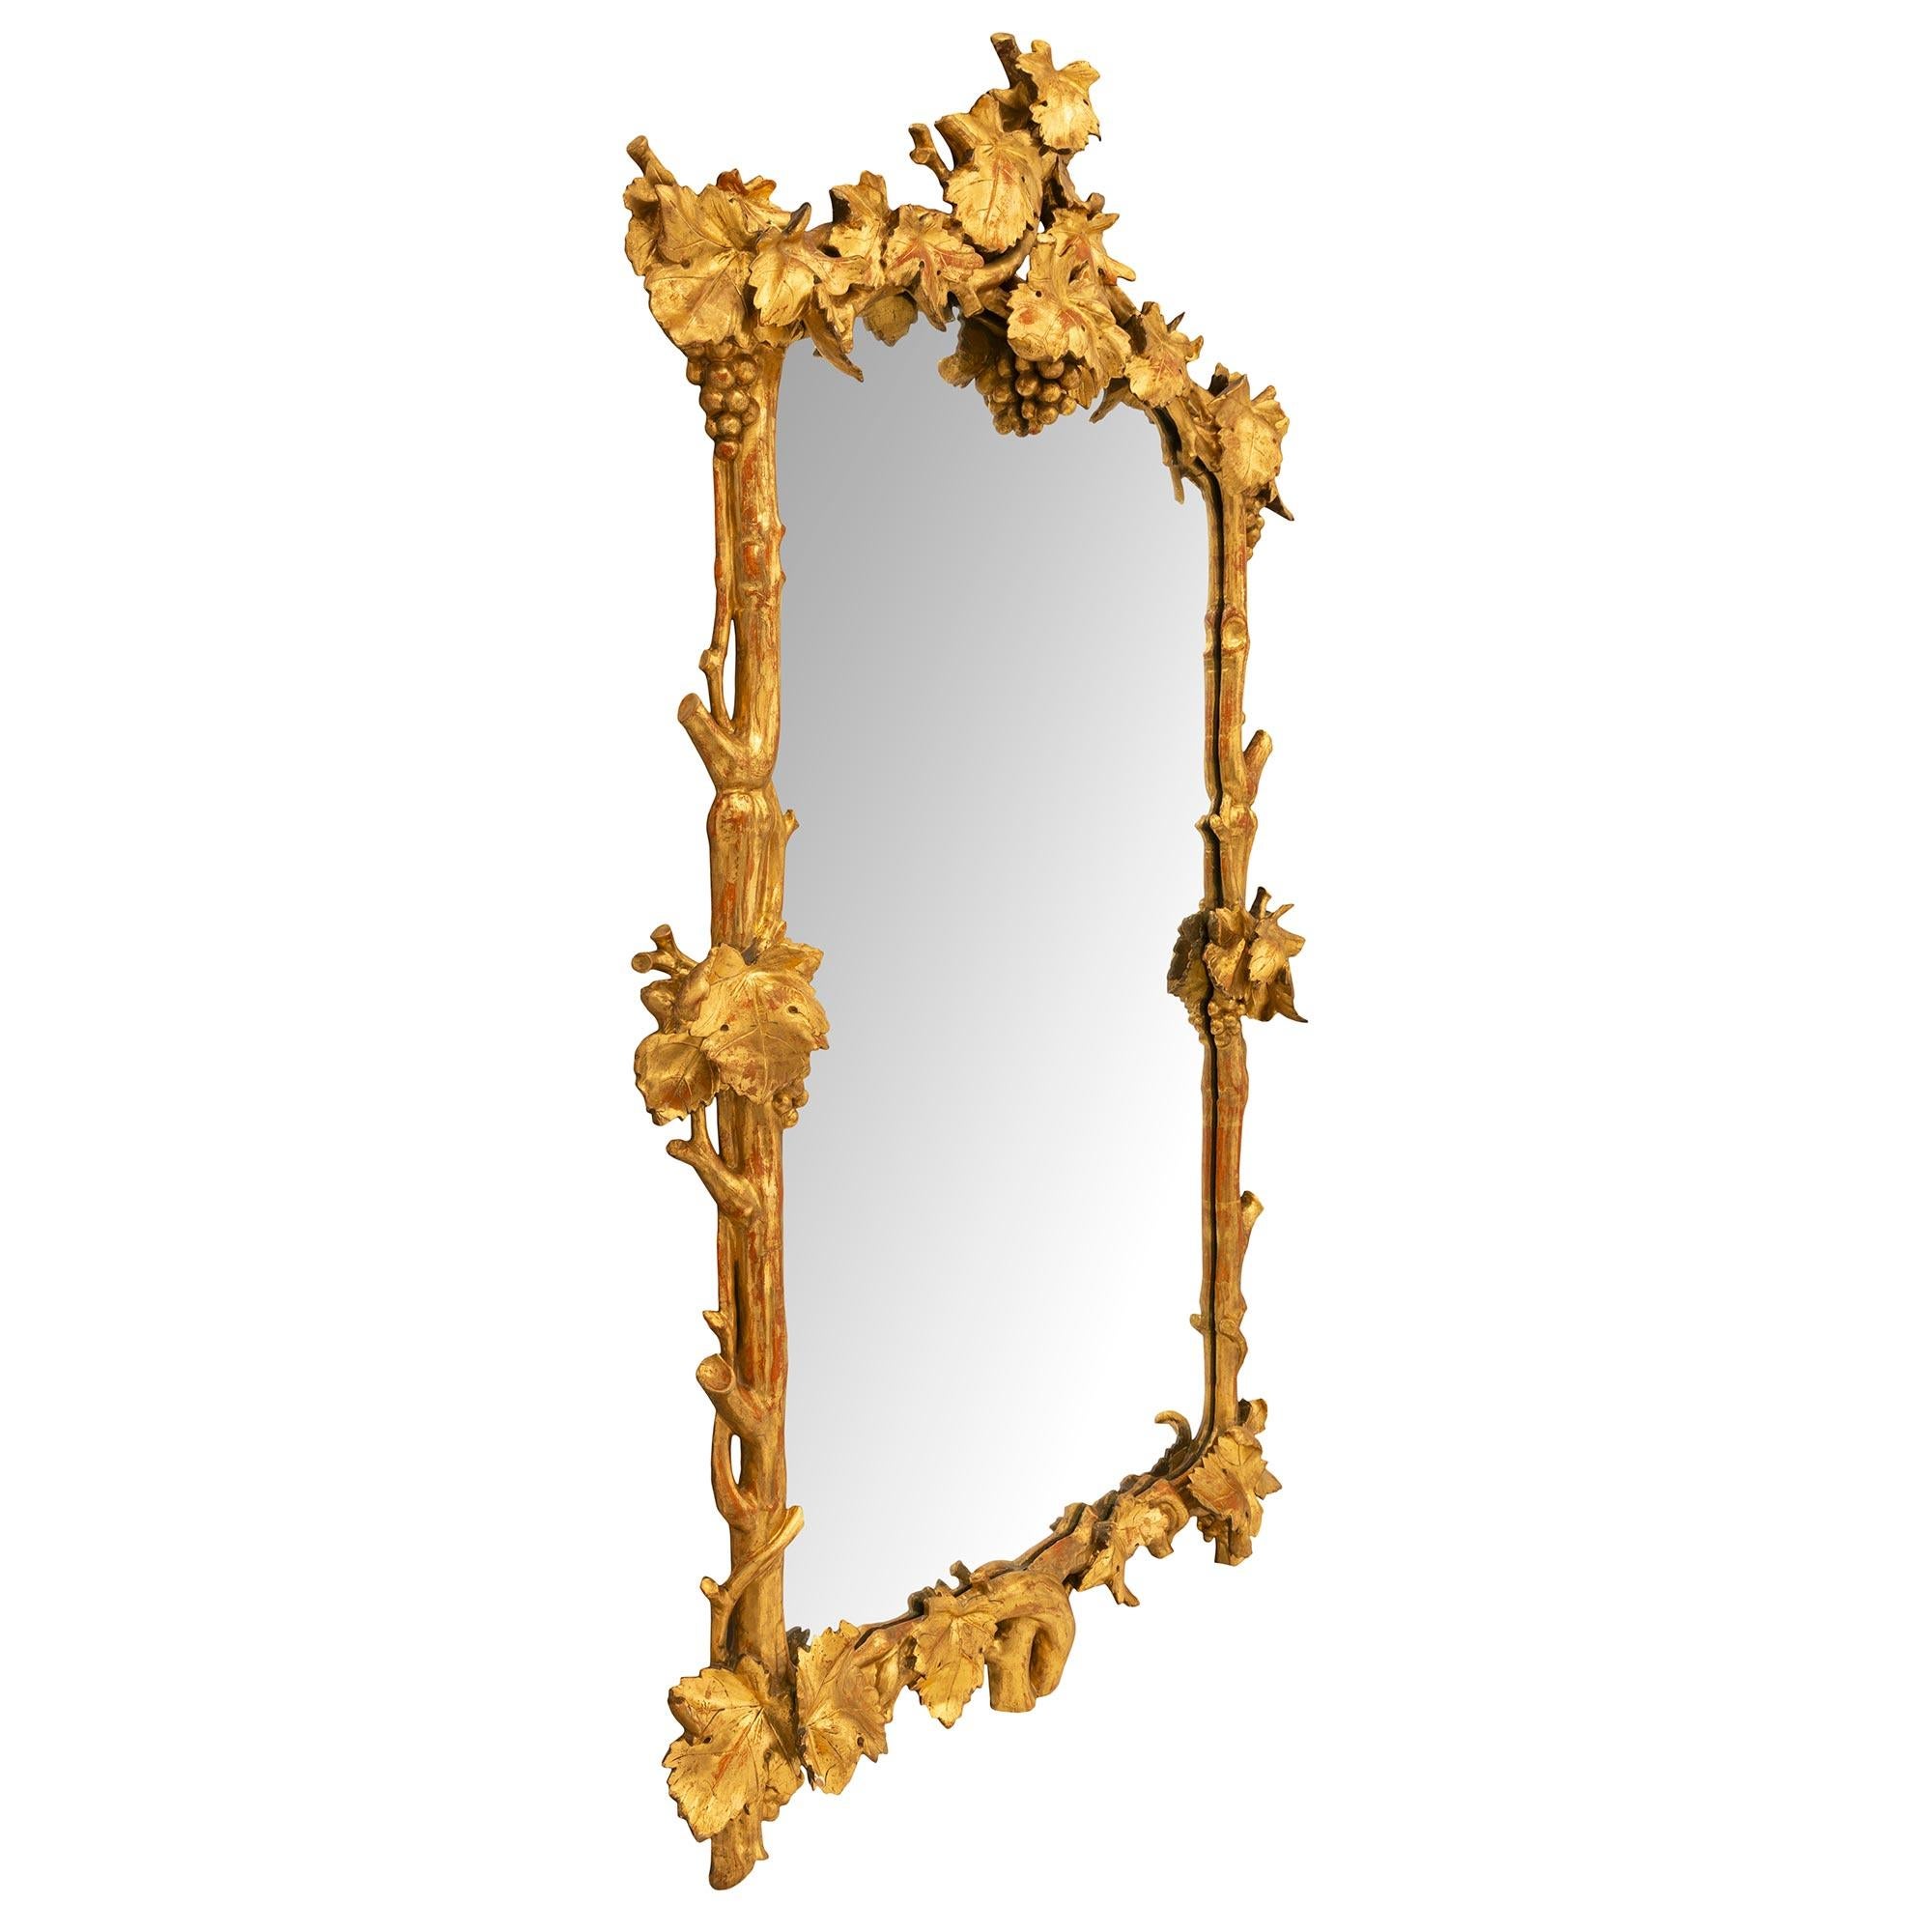 A lovely and unique Italian early 19th century giltwood mirror. The original mirror plate is framed within a branch like giltwood border with wonderful movement. The bottom is centered by two branches coming together and overlapping with large oak